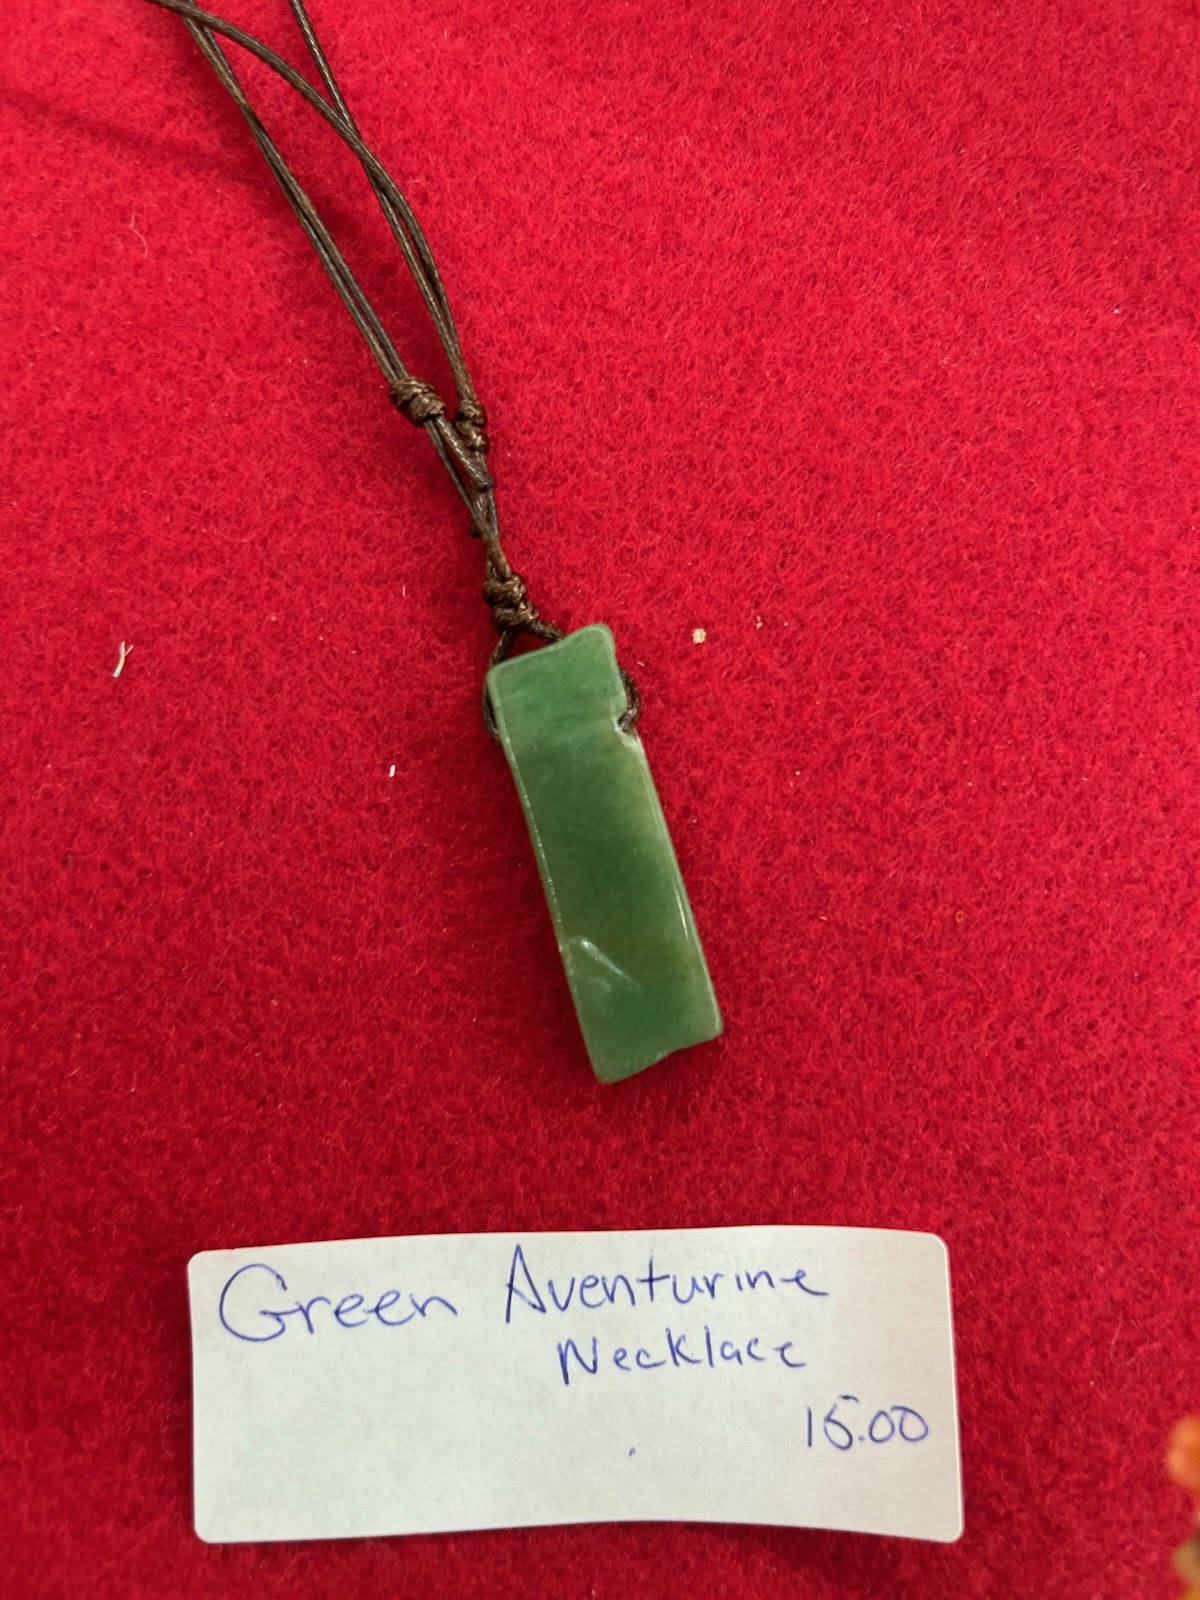 A green aventurine necklace is shown on a red background.